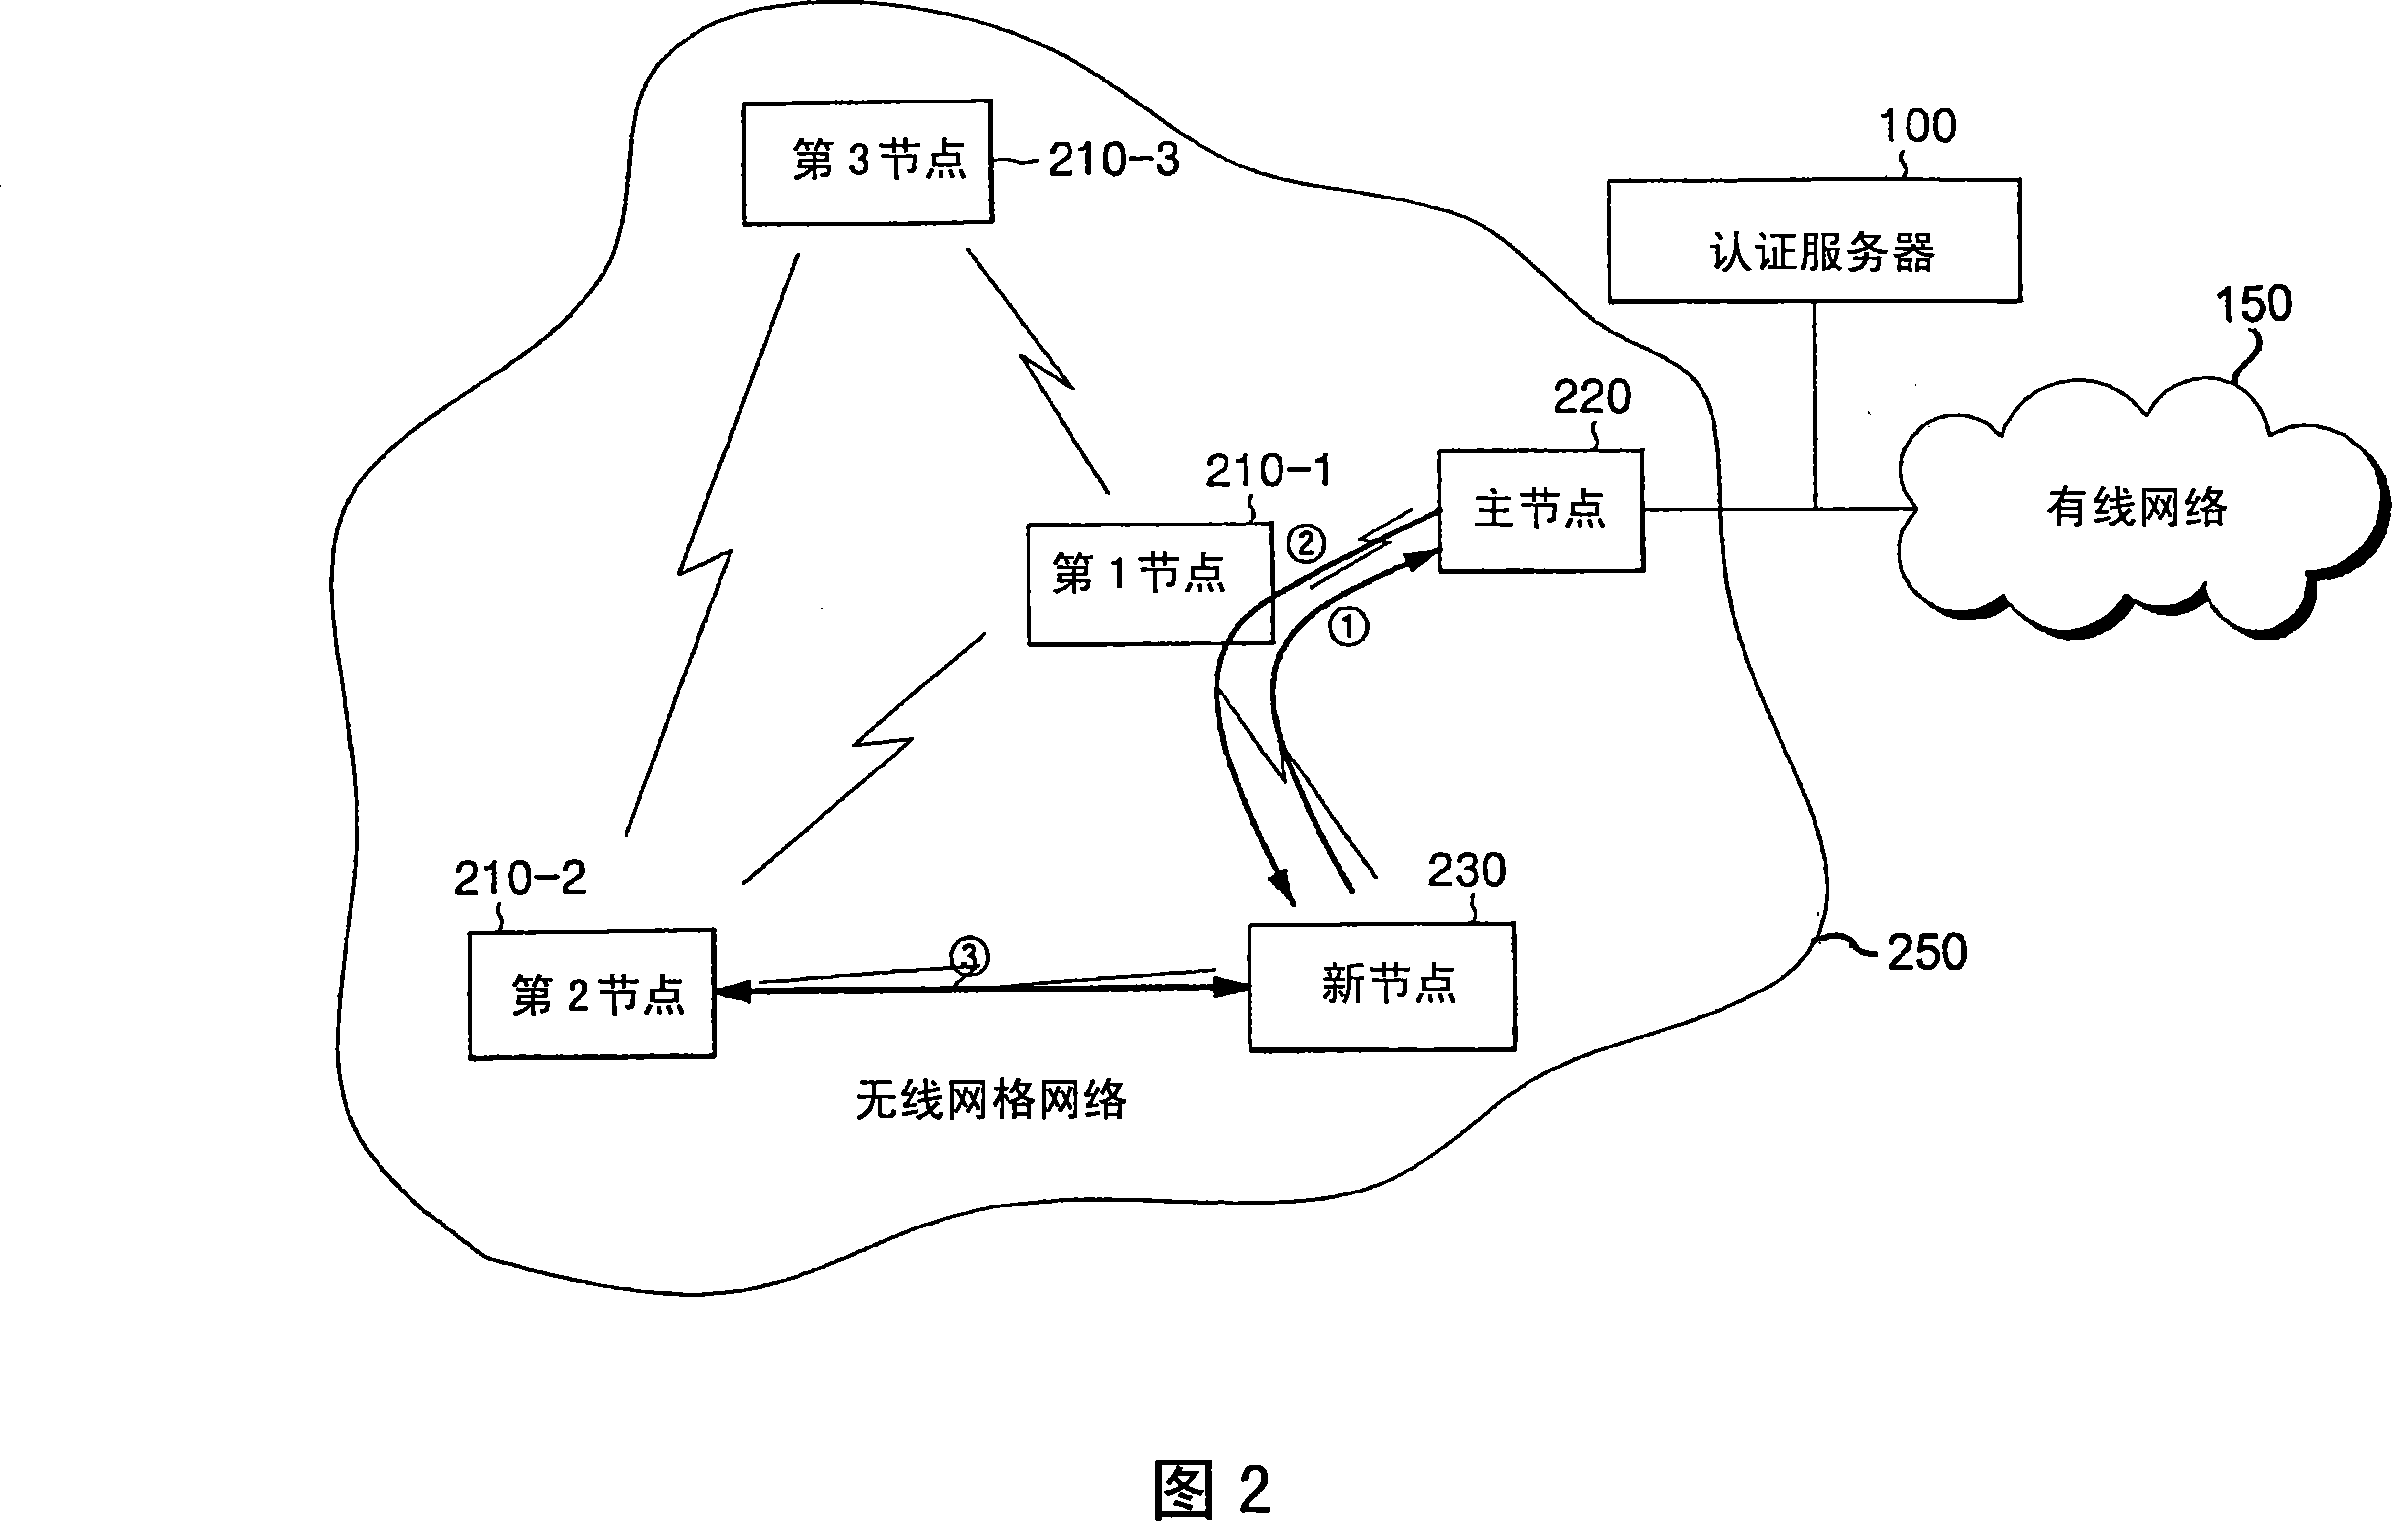 Authentication apparatus and method in wireless mesh network